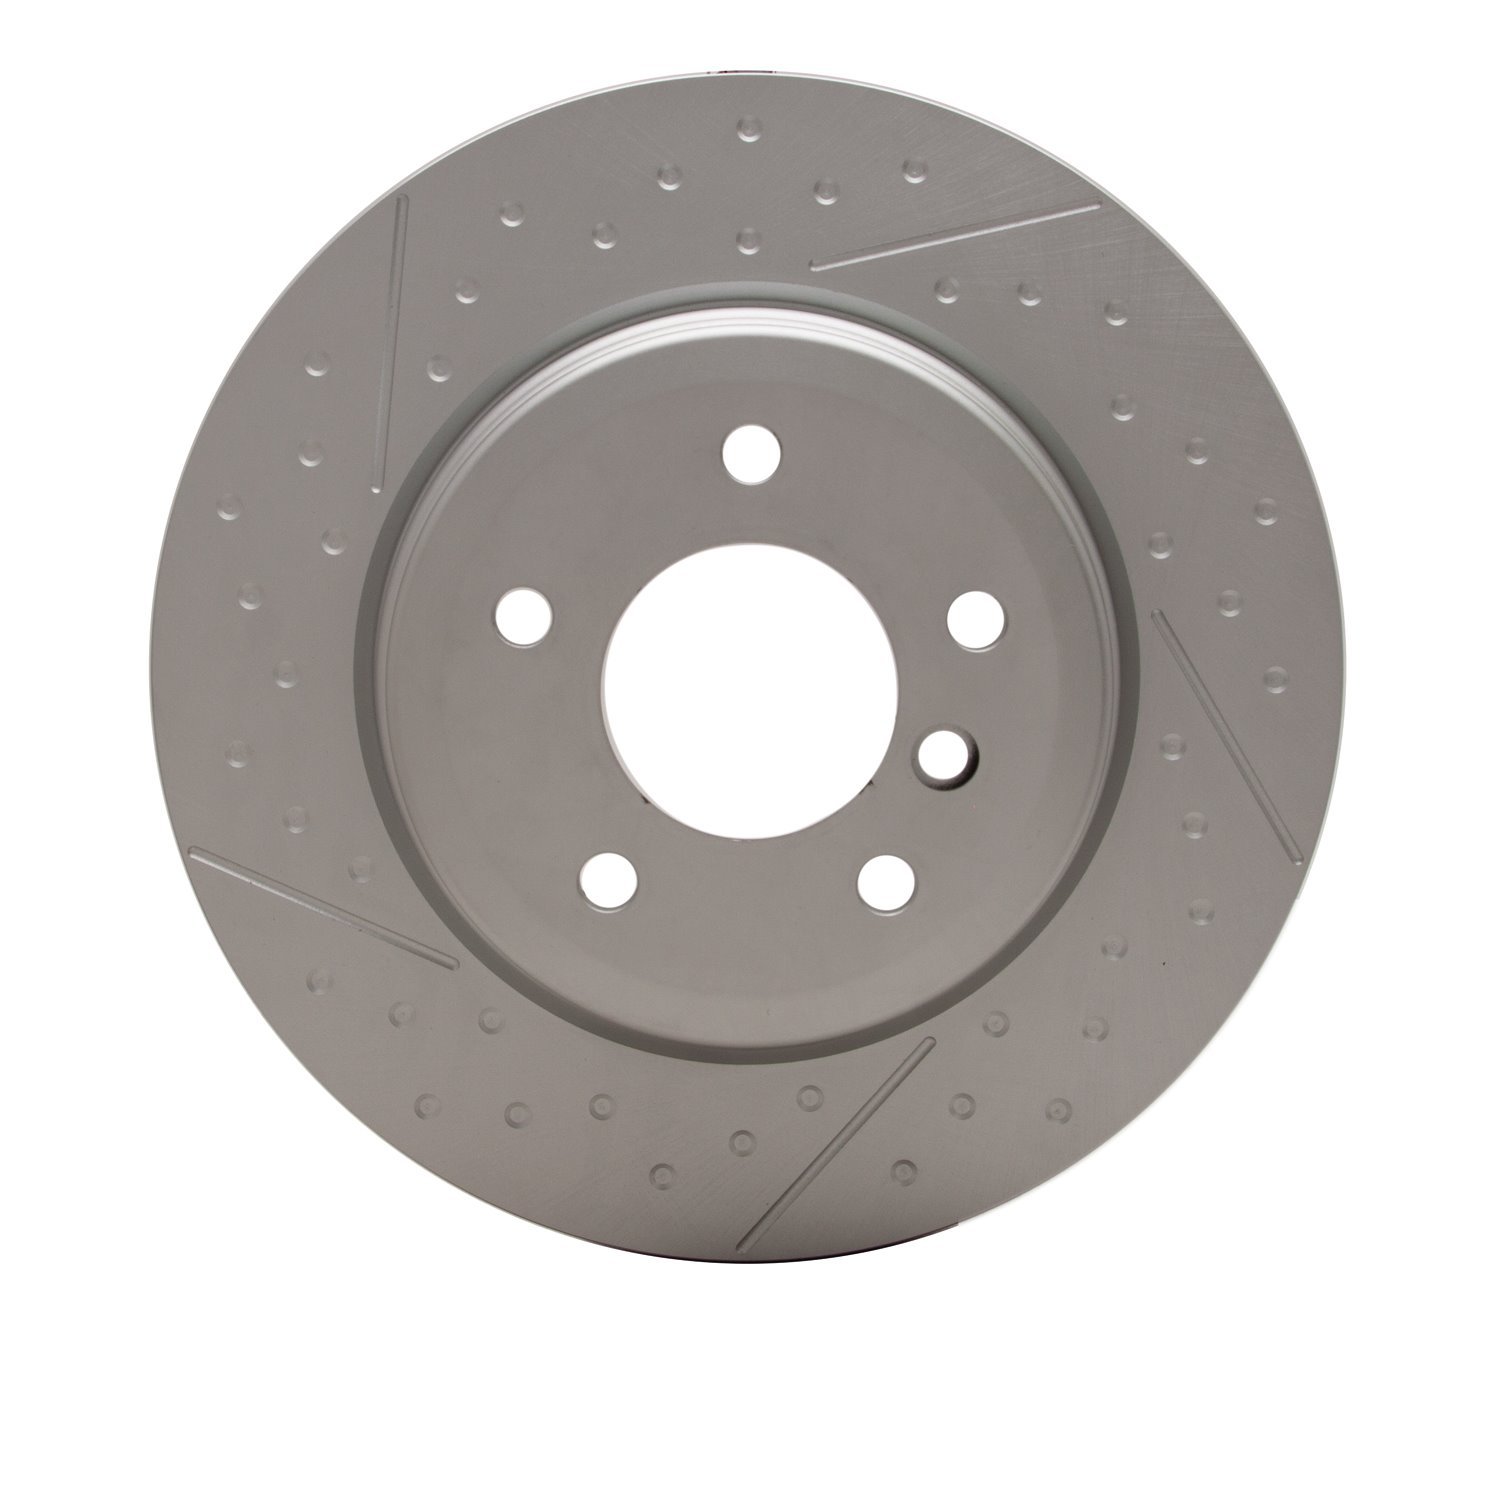 Hi-Carbon Alloy Geomet-Coated Dimpled & Slotted Rotor, 2006-2013 BMW, Position: Rear